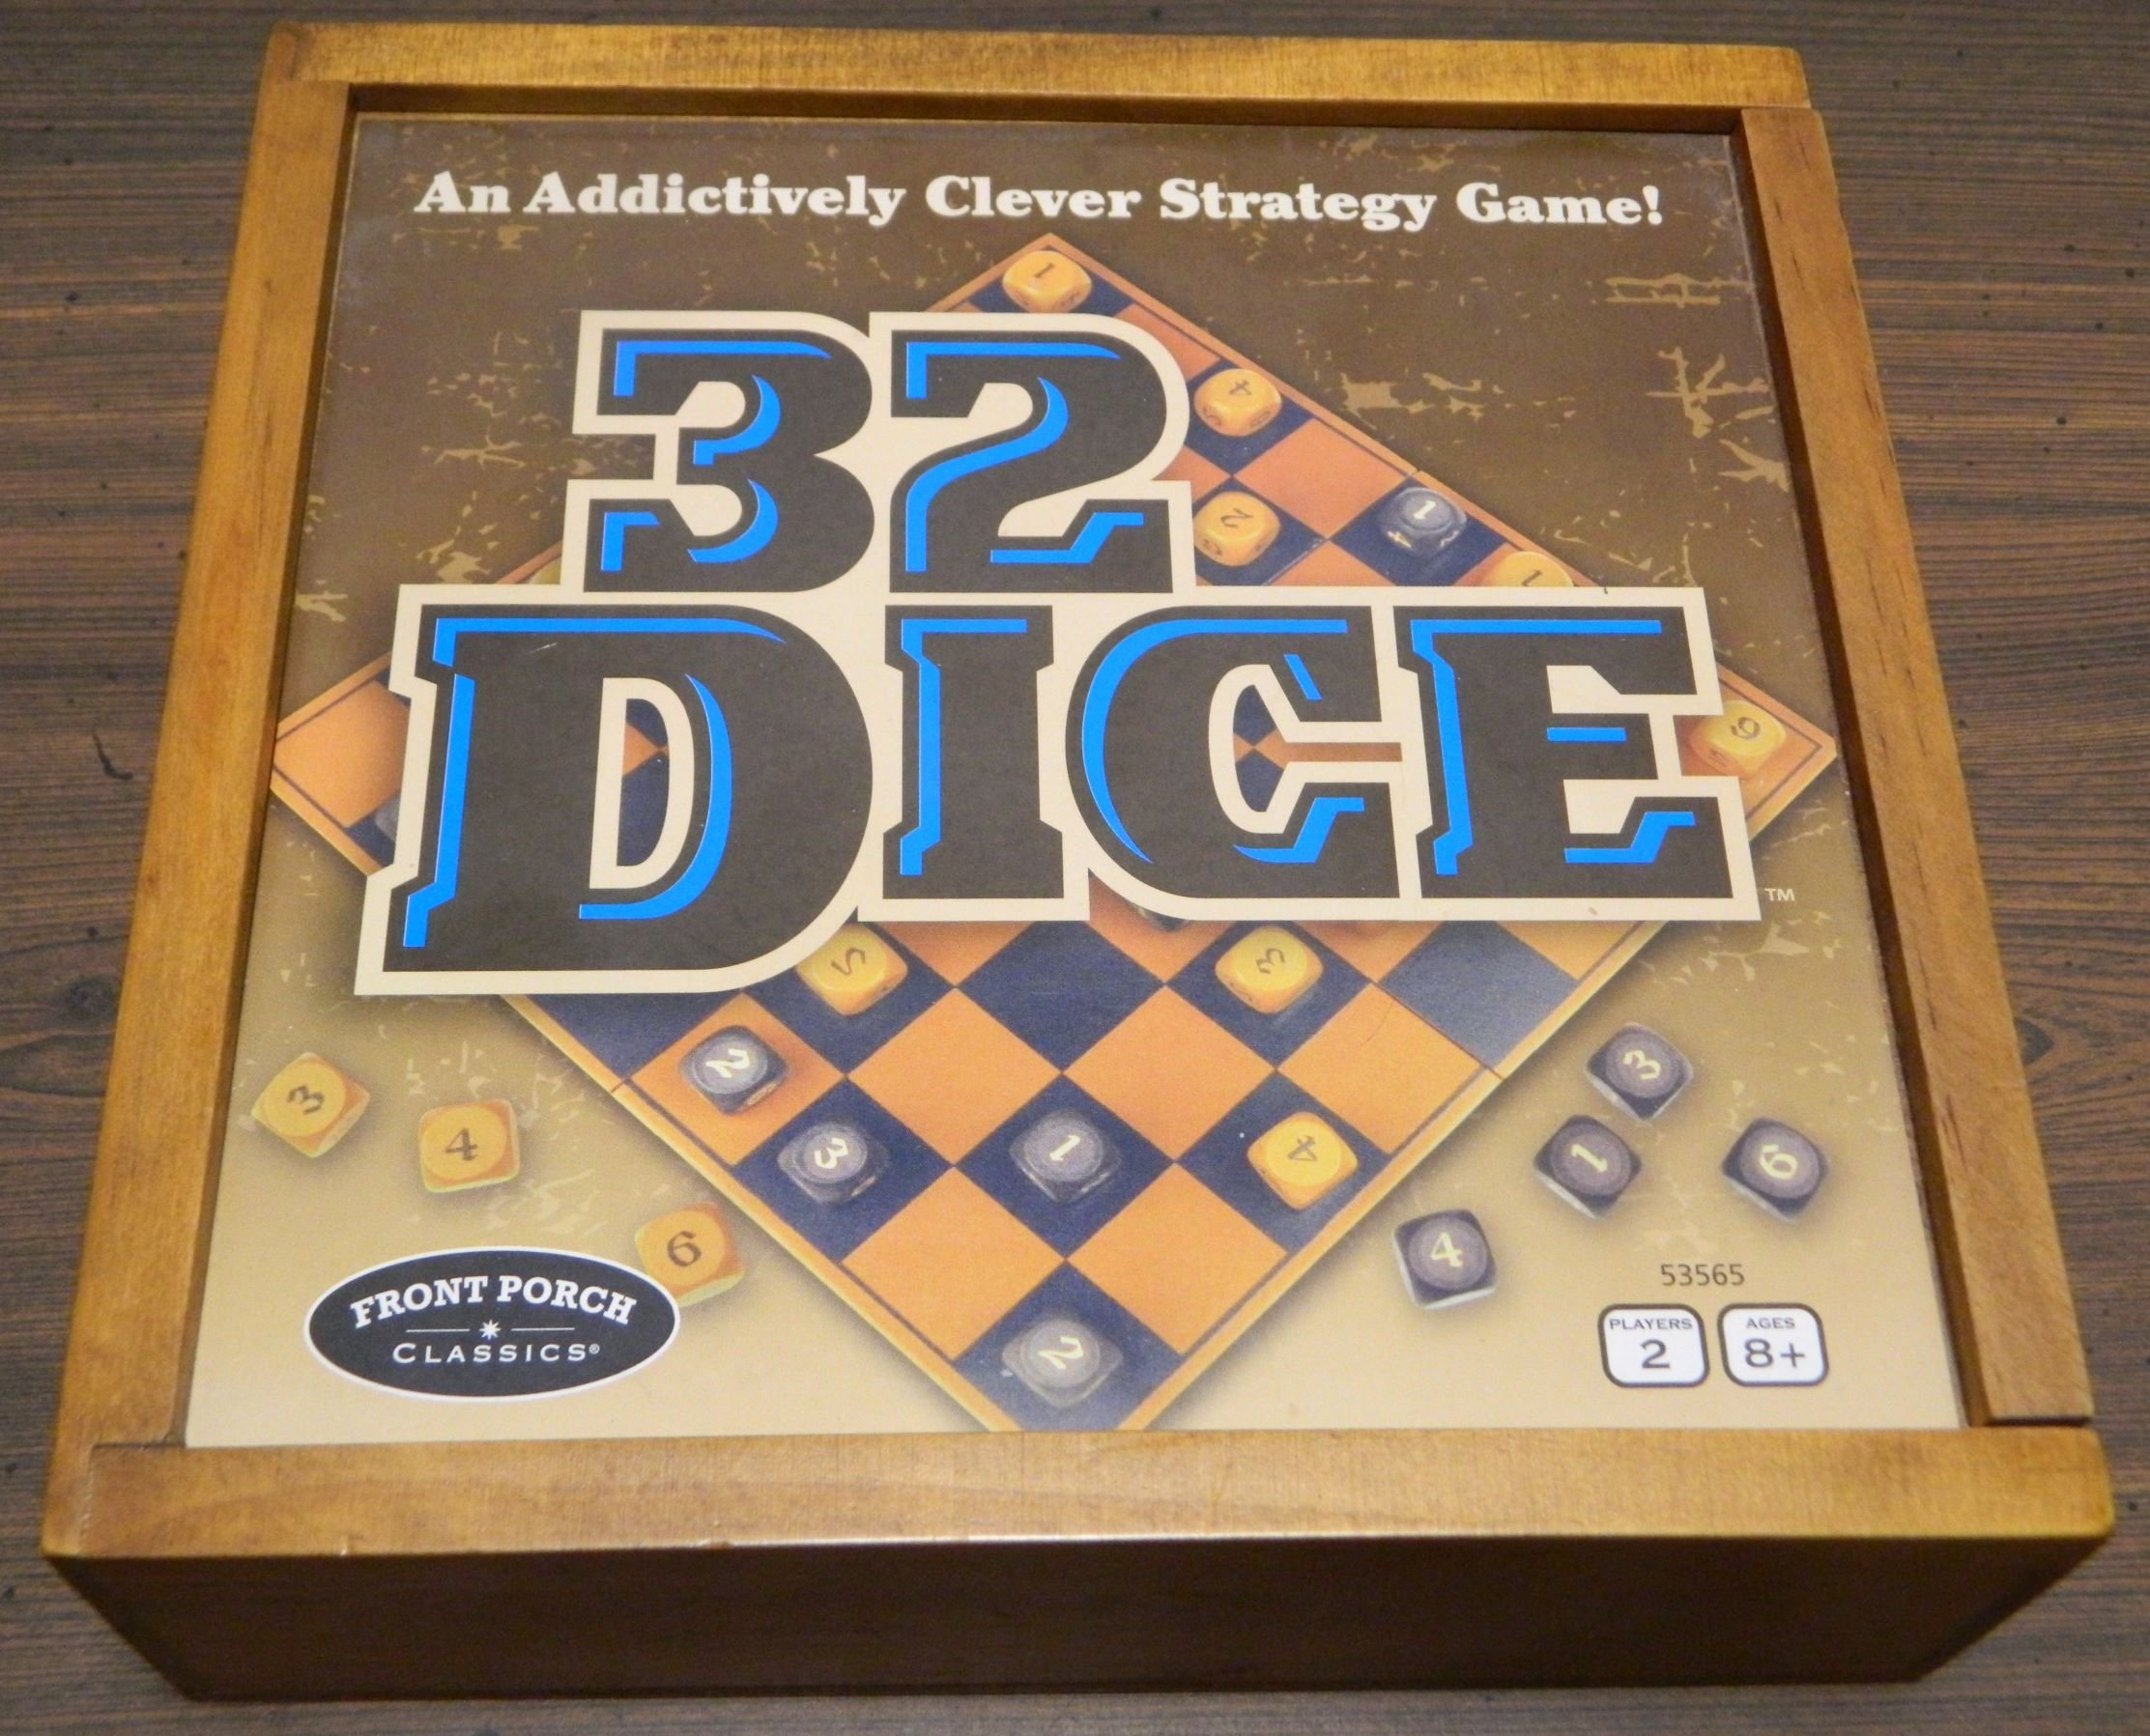 32 Dice Board Game Review and Rules